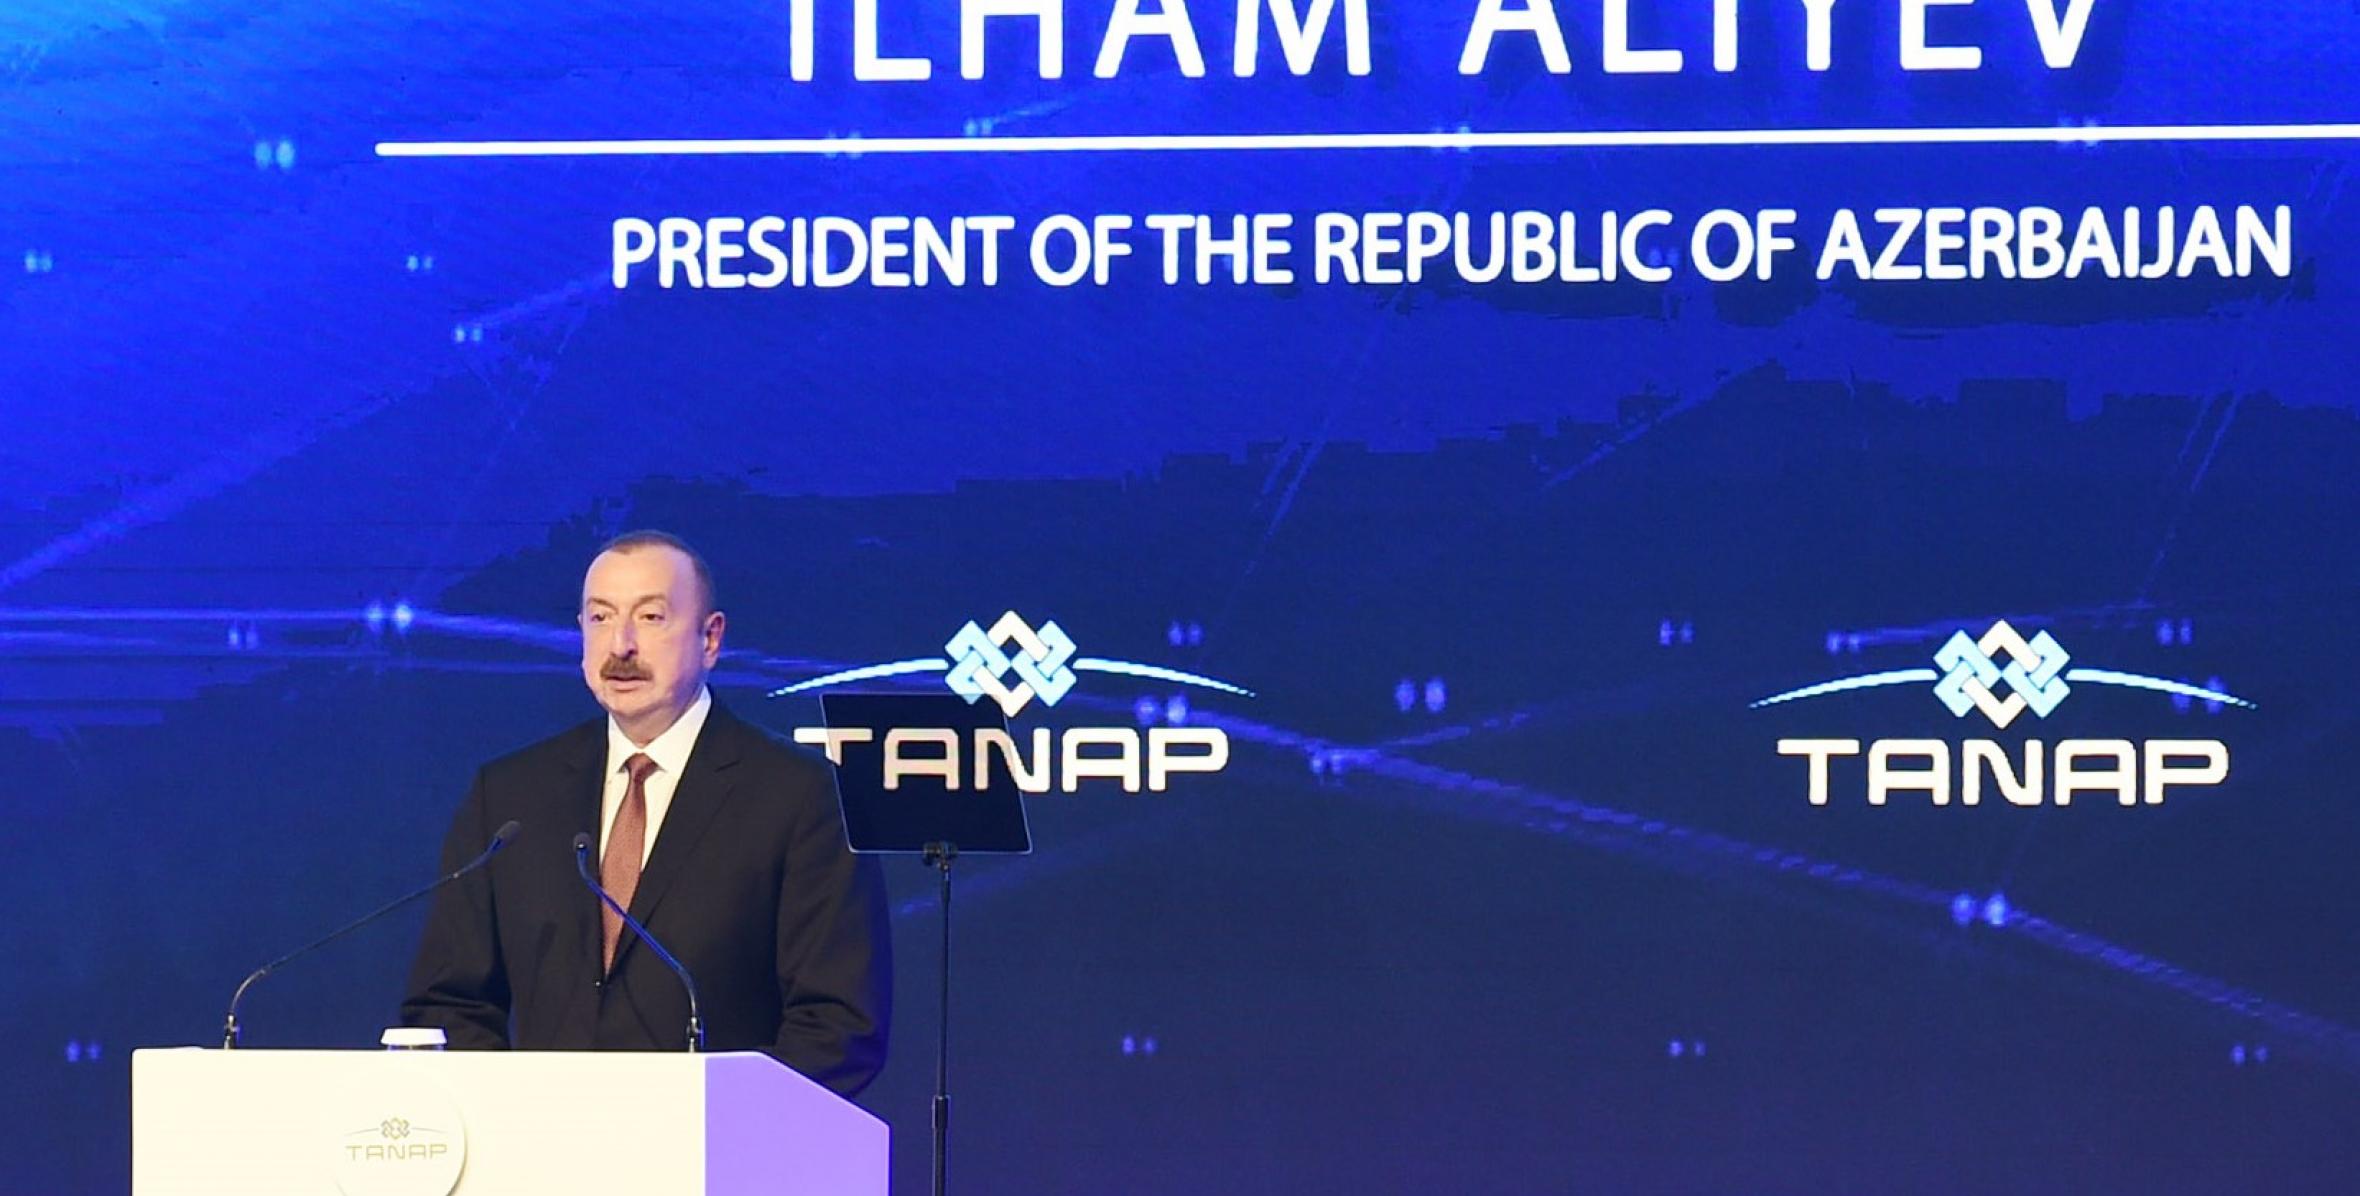 Speech by Ilham Aliyev at the official opening ceremony of TANAP project